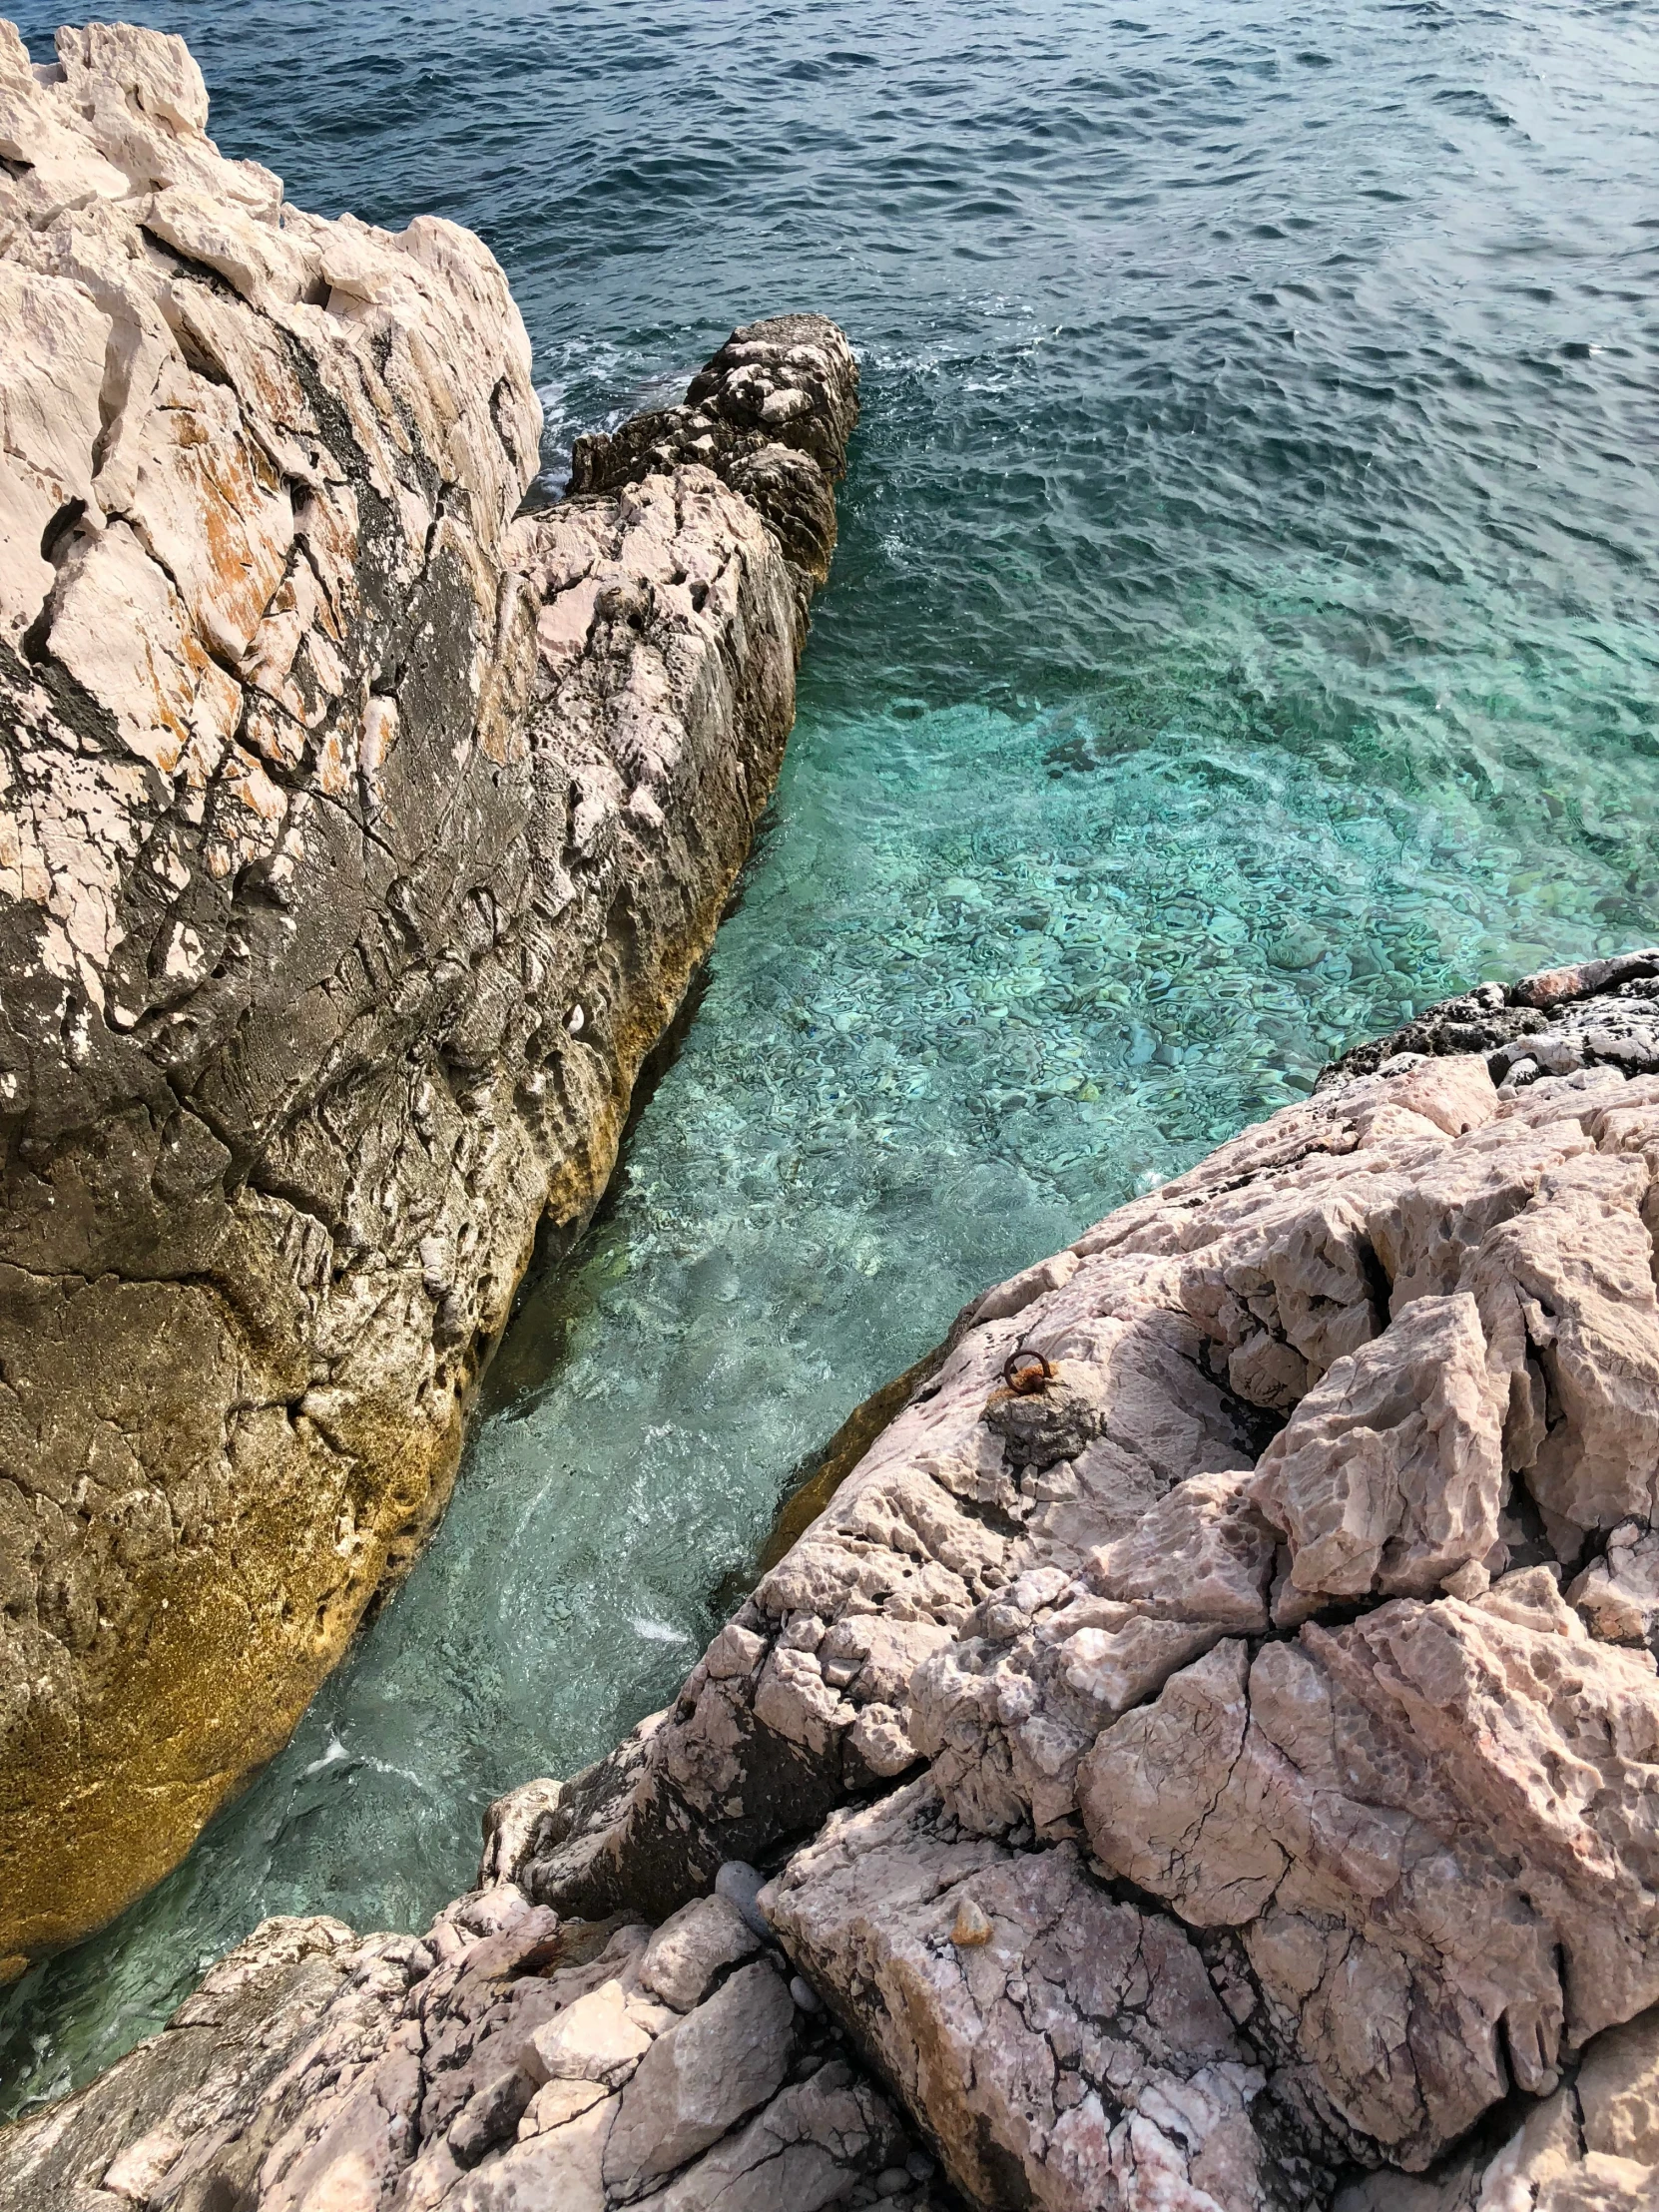 a view of a body of water between large rocks